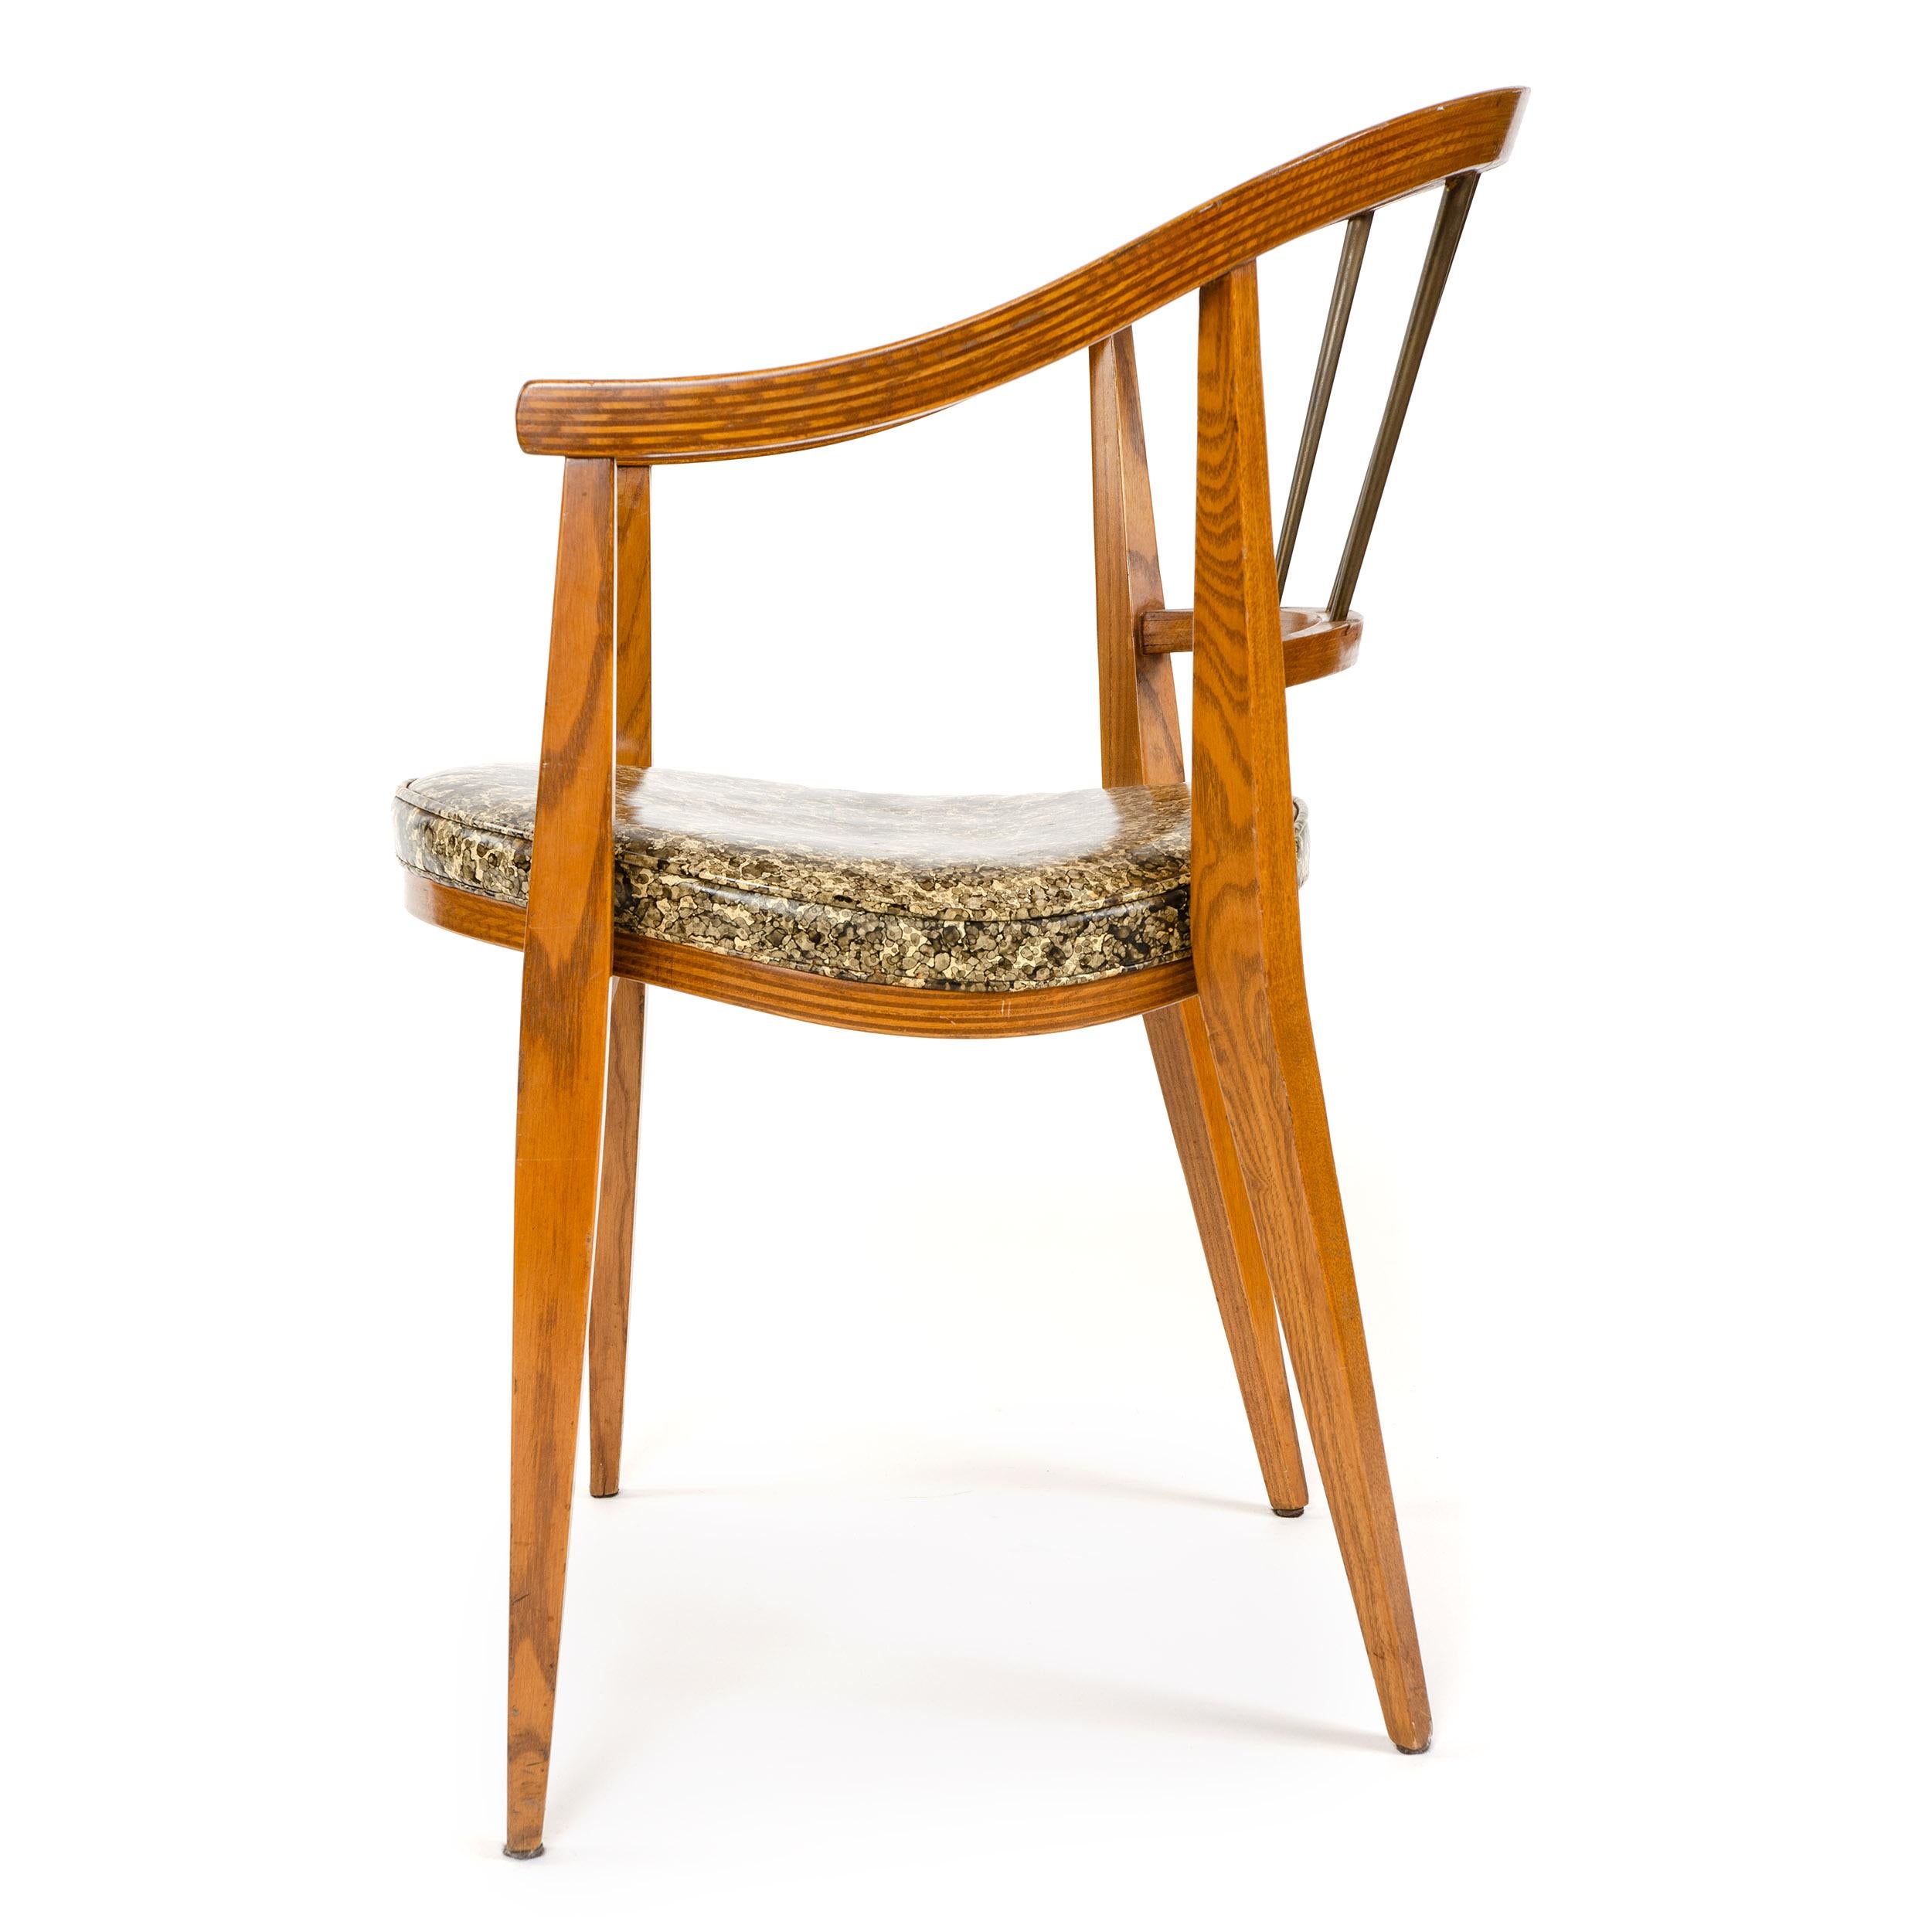 American 1950s Petite Armchair in Oak and Oil Drop Leather by Edward Wormley for Dunbar